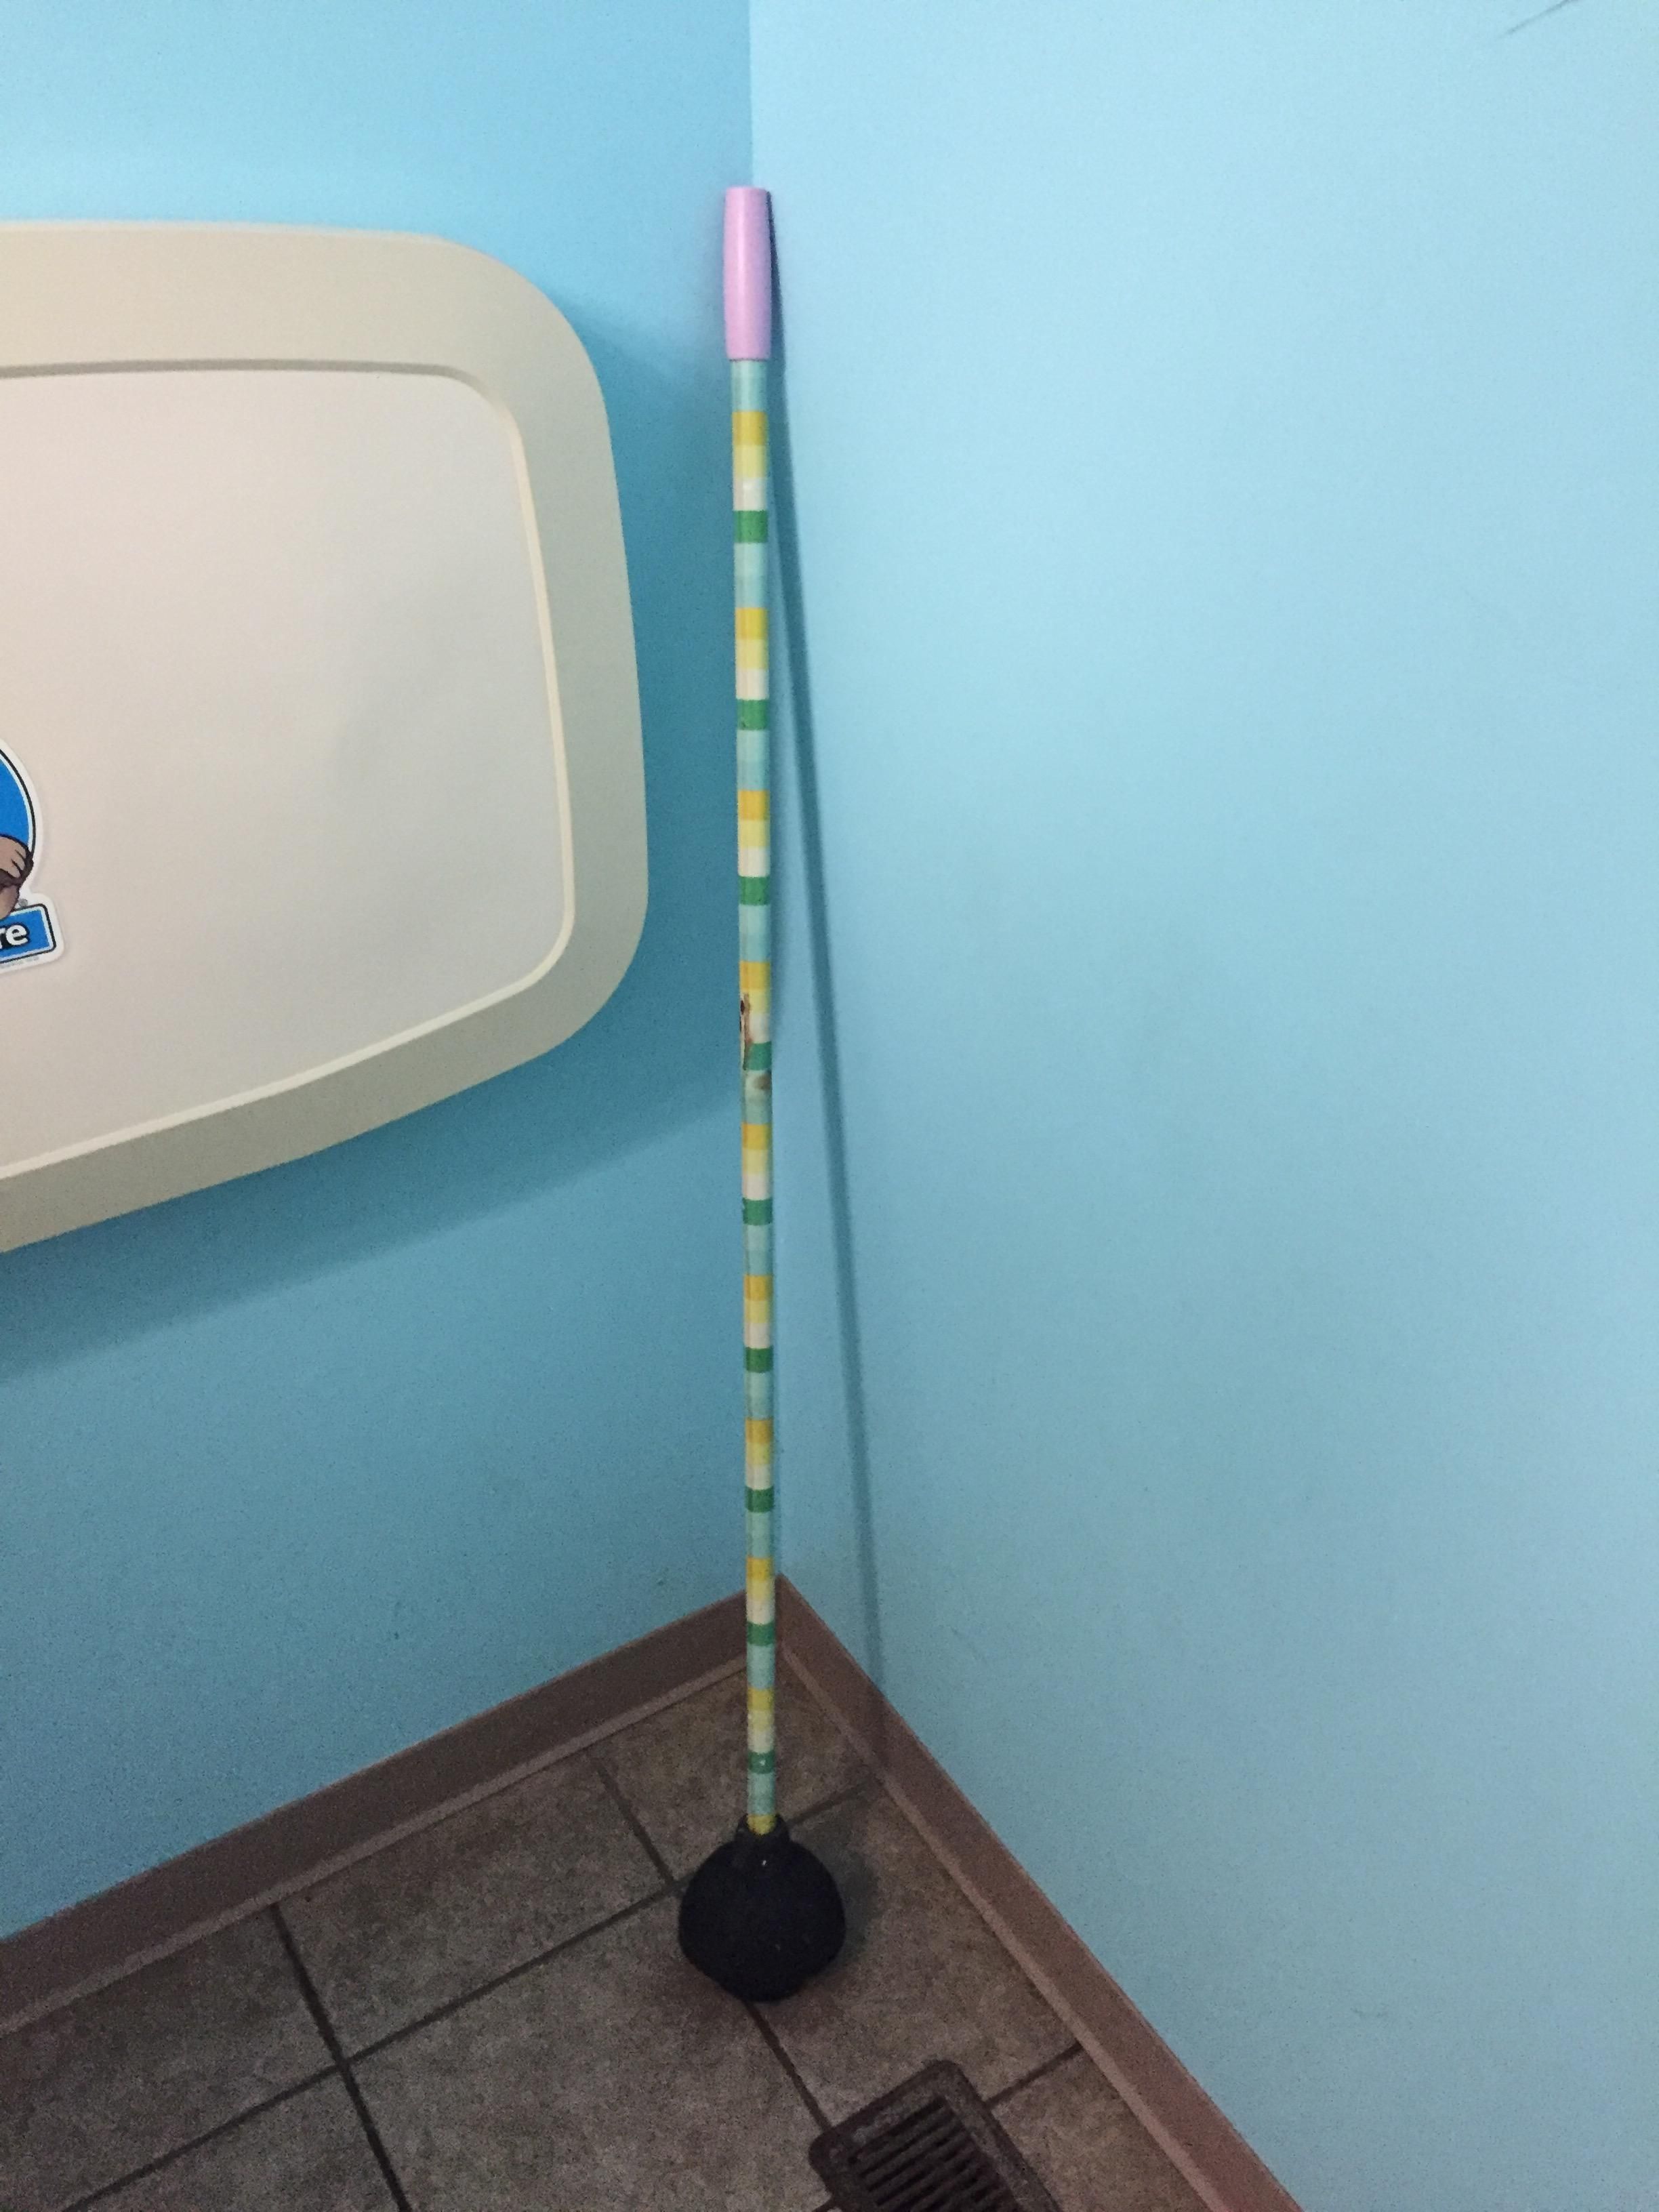 Im not sure what led to the creation of the world's longest plunger, but I'm glad I missed it.